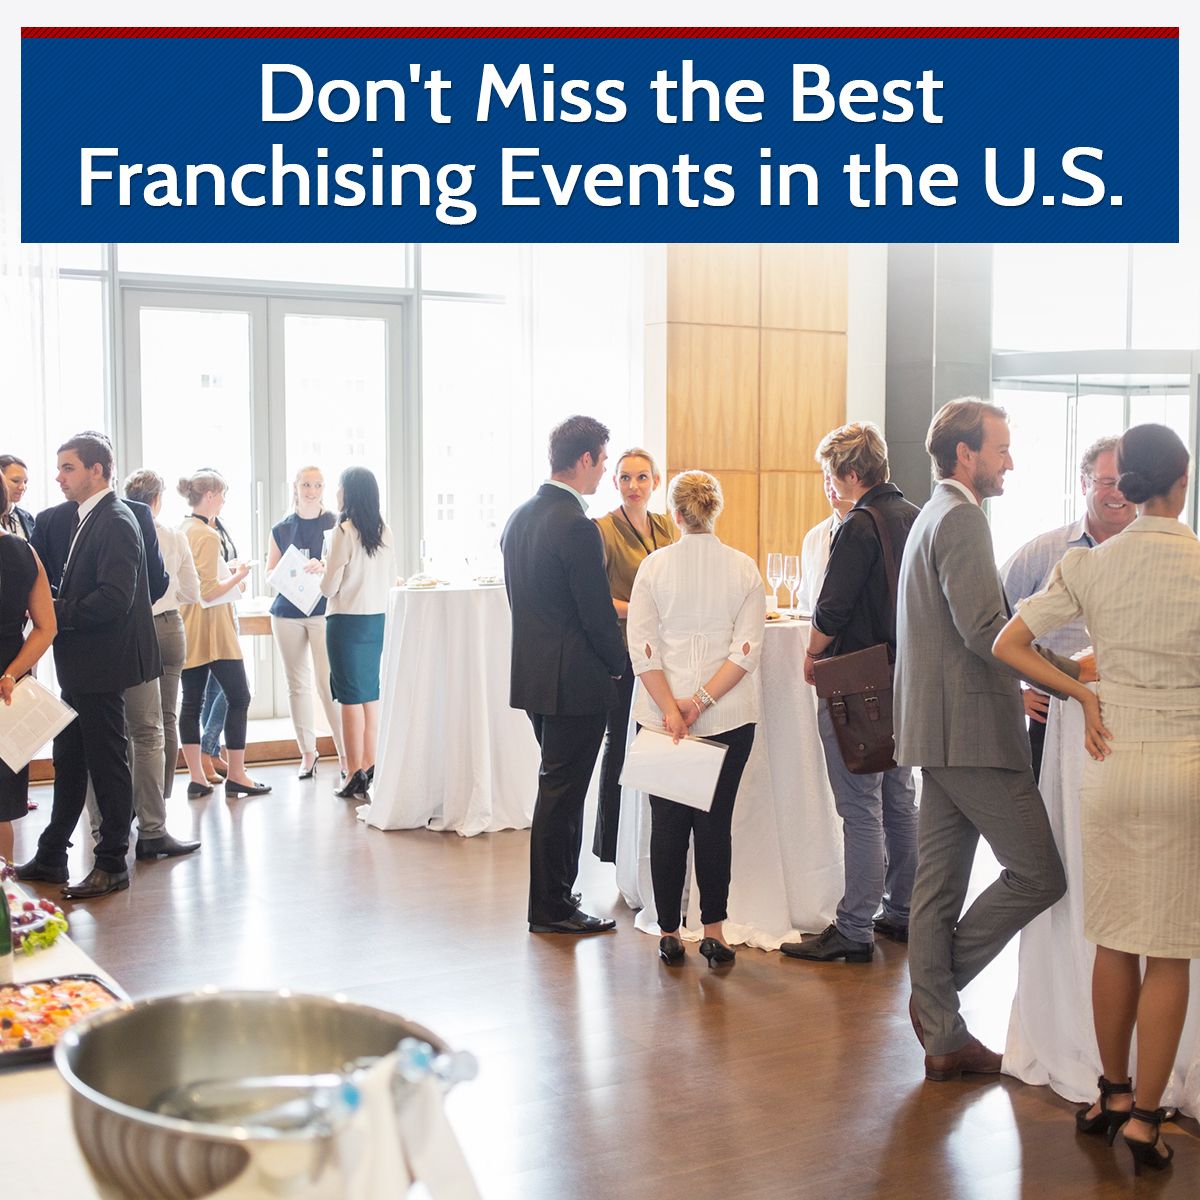 Don't Miss the Best Franchising Events in the U.S.